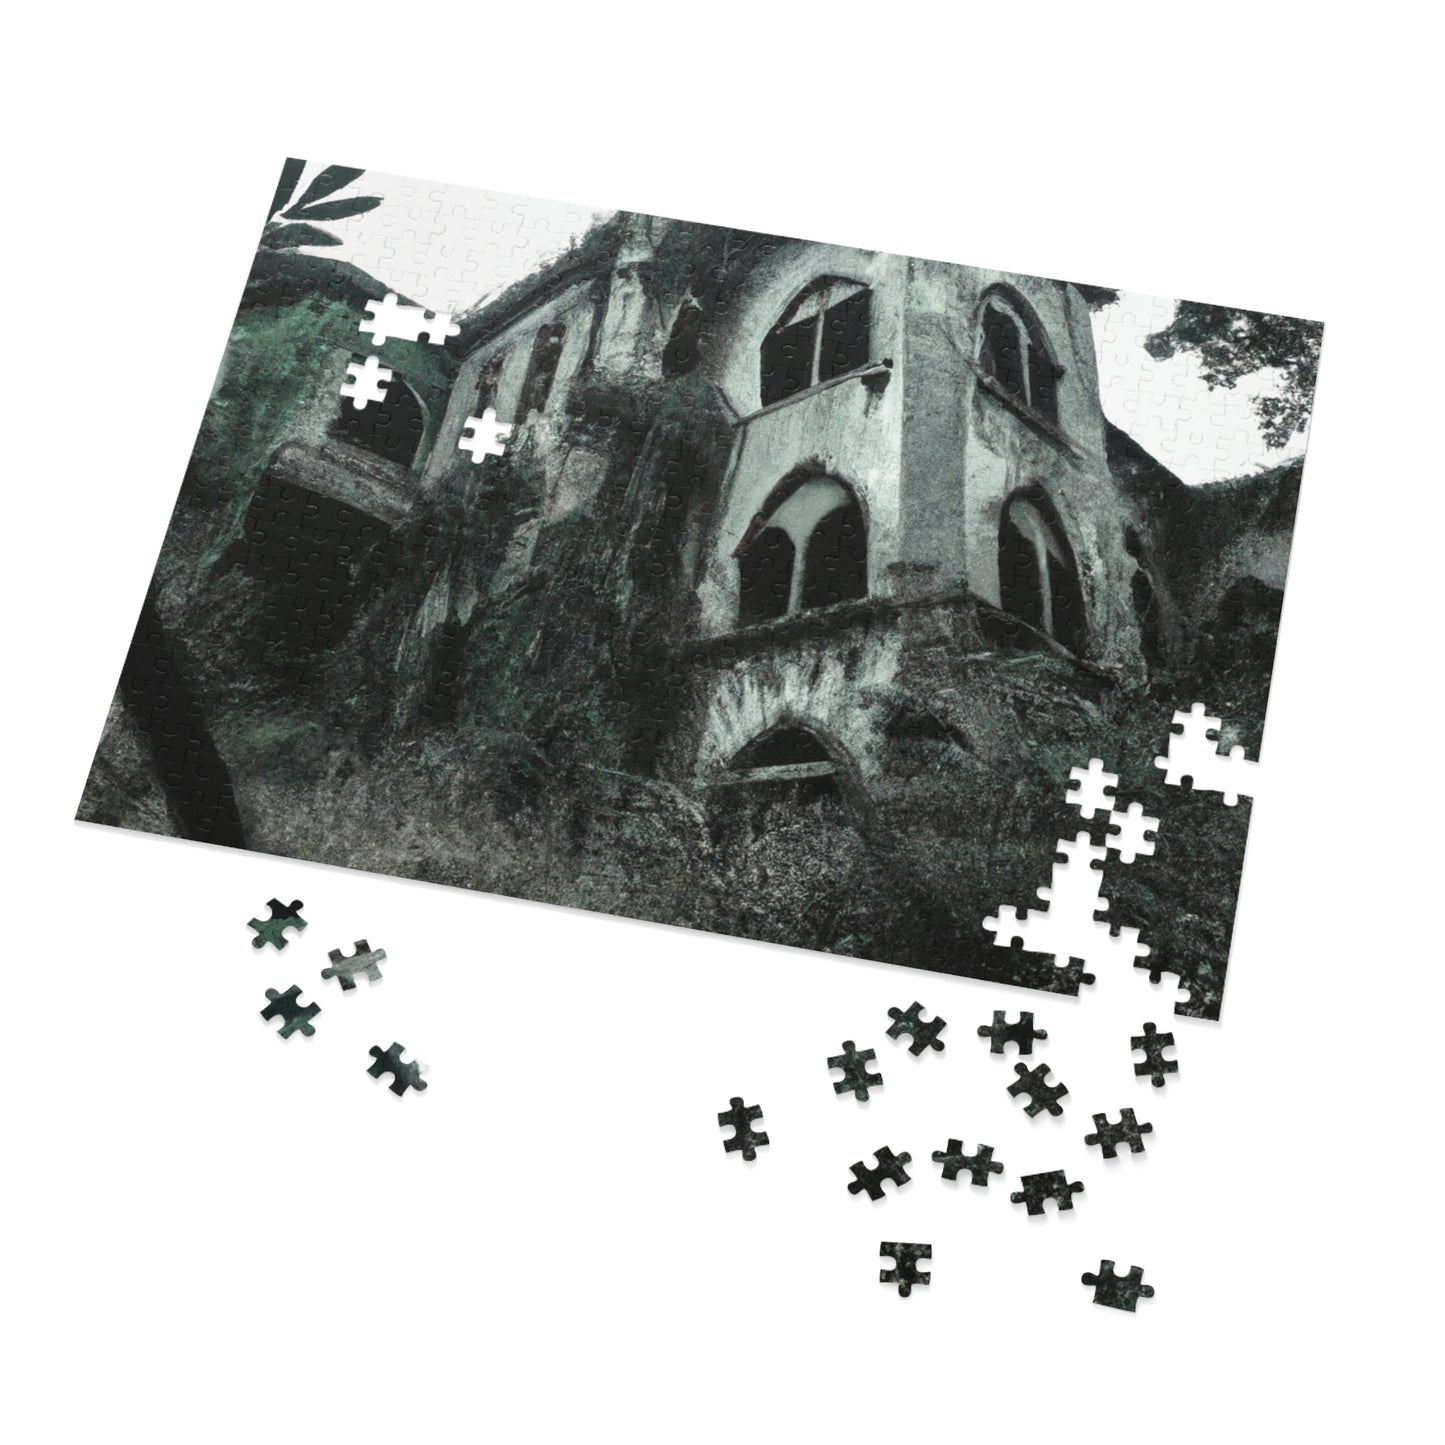 "The Castle of Cursed Antiquities" - The Alien Jigsaw Puzzle